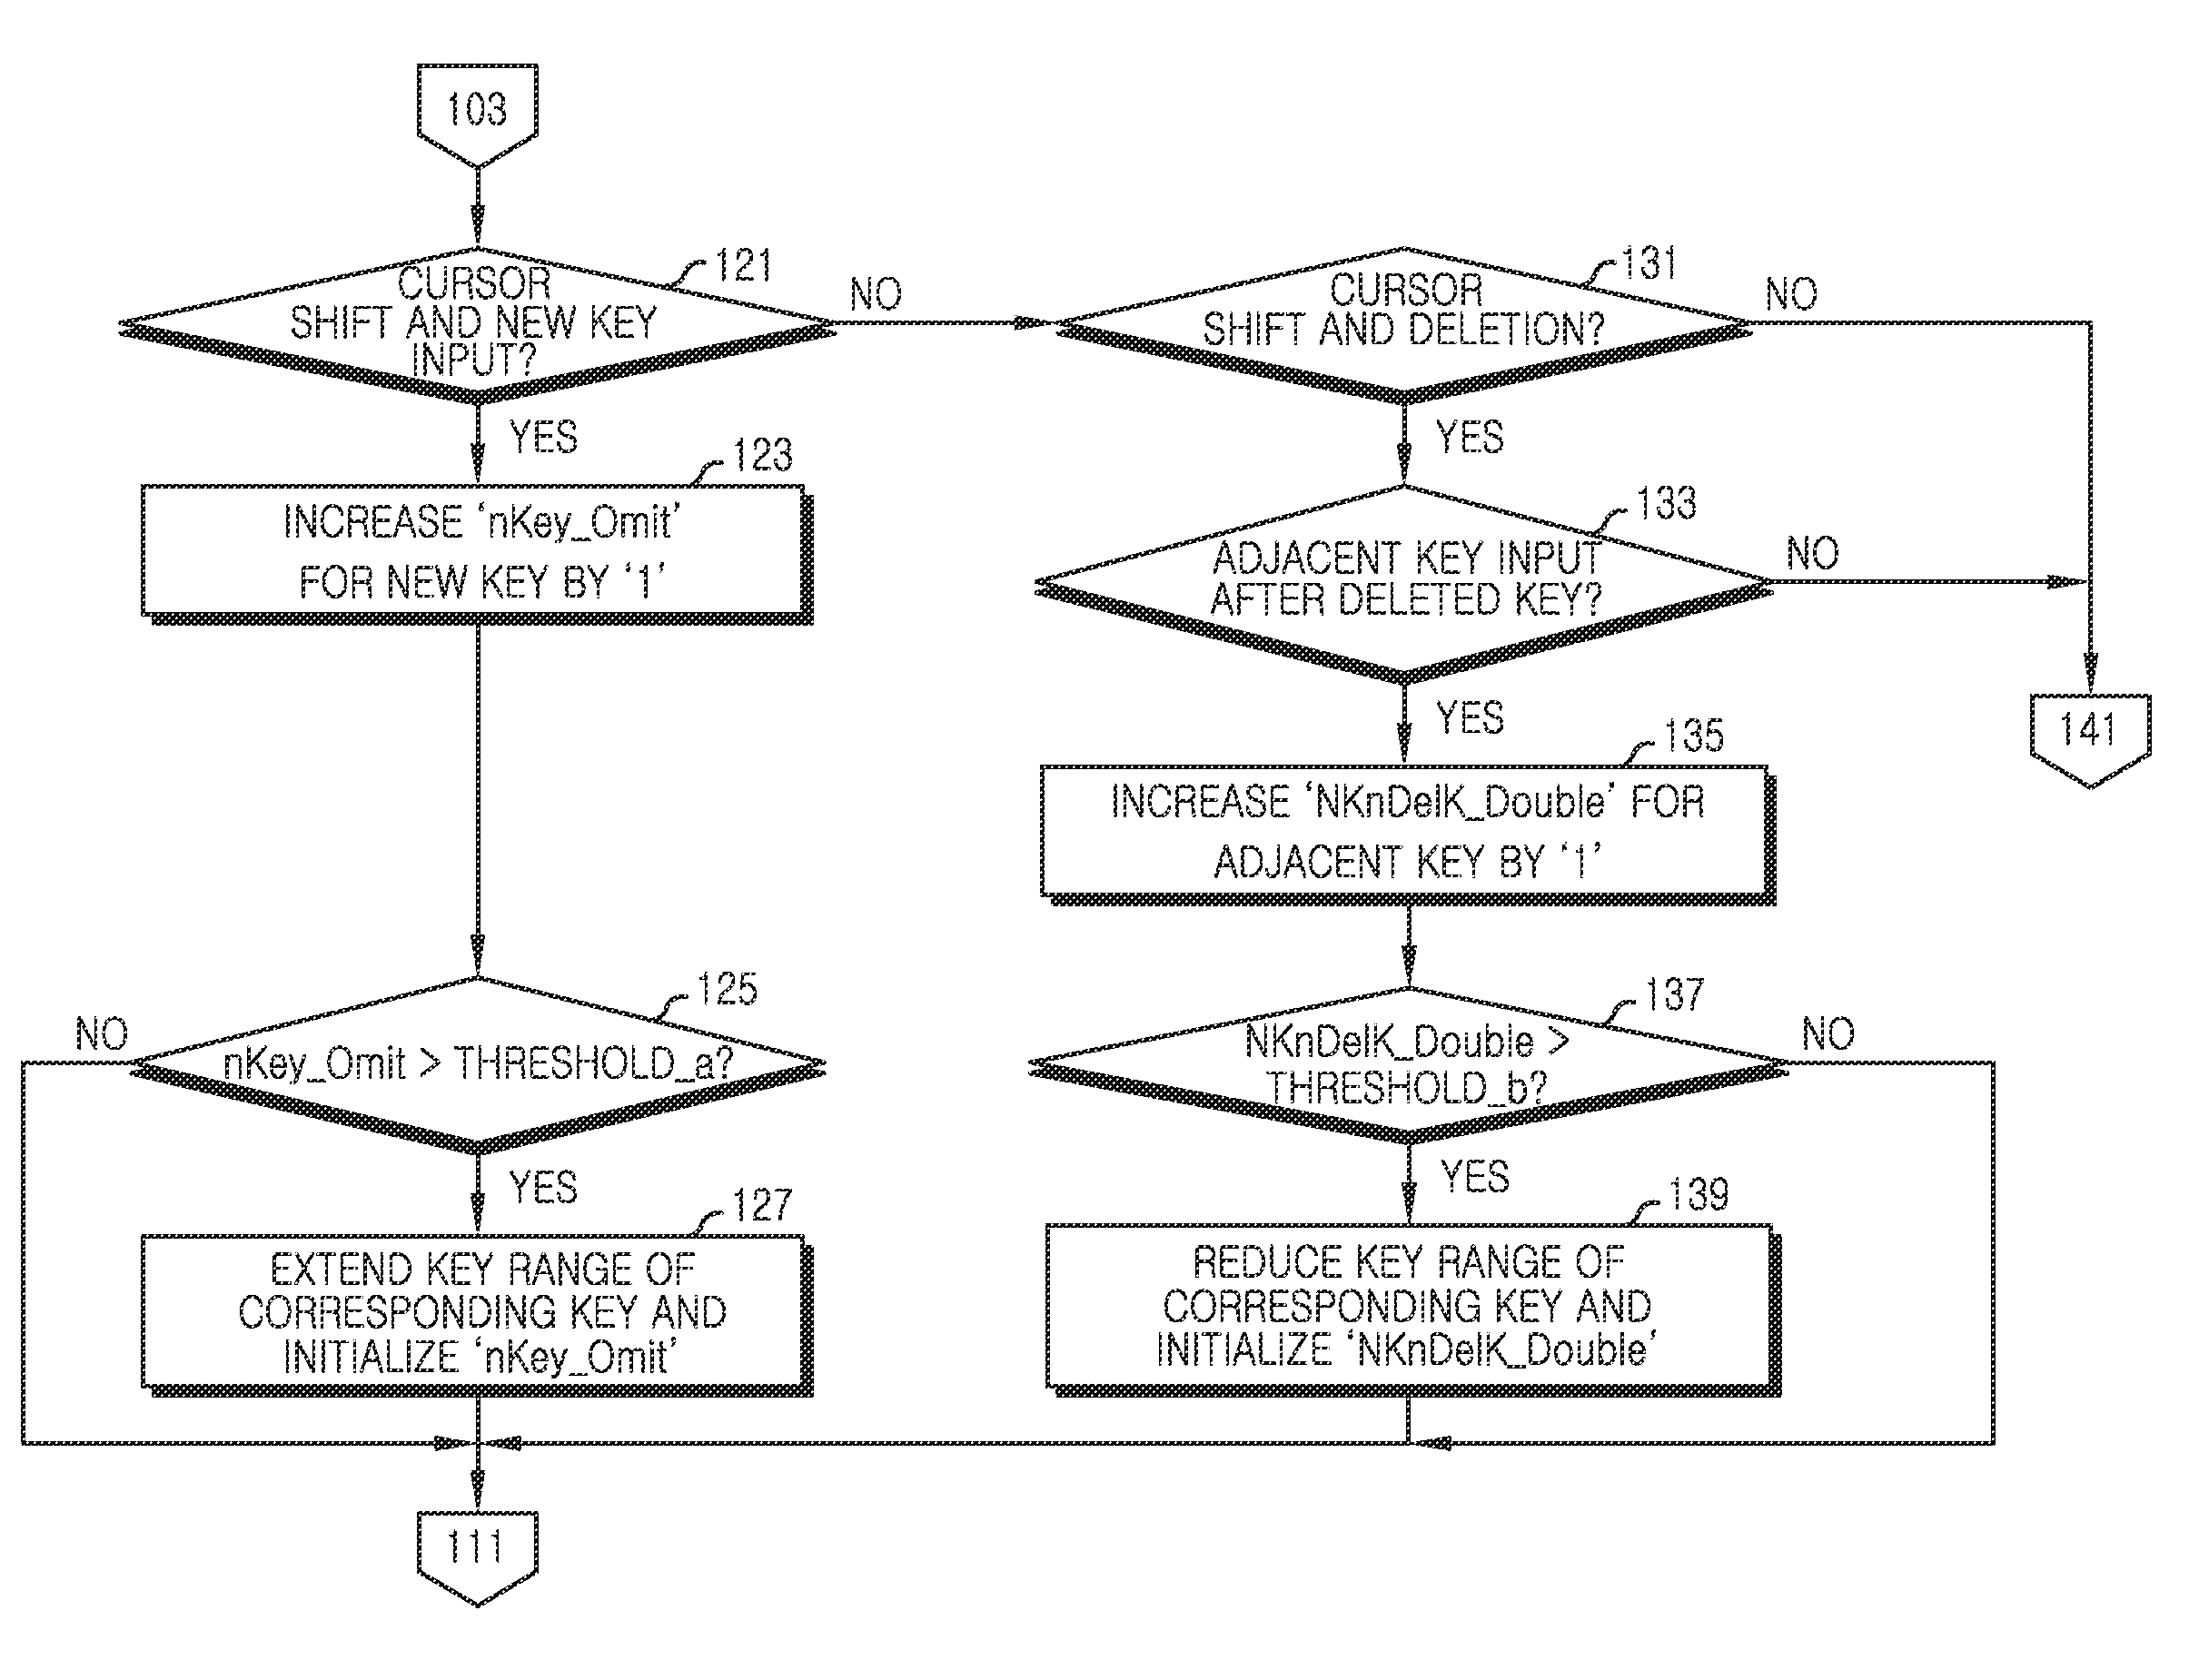 Apparatus and method for adjusting a key range of a keycapless keyboard